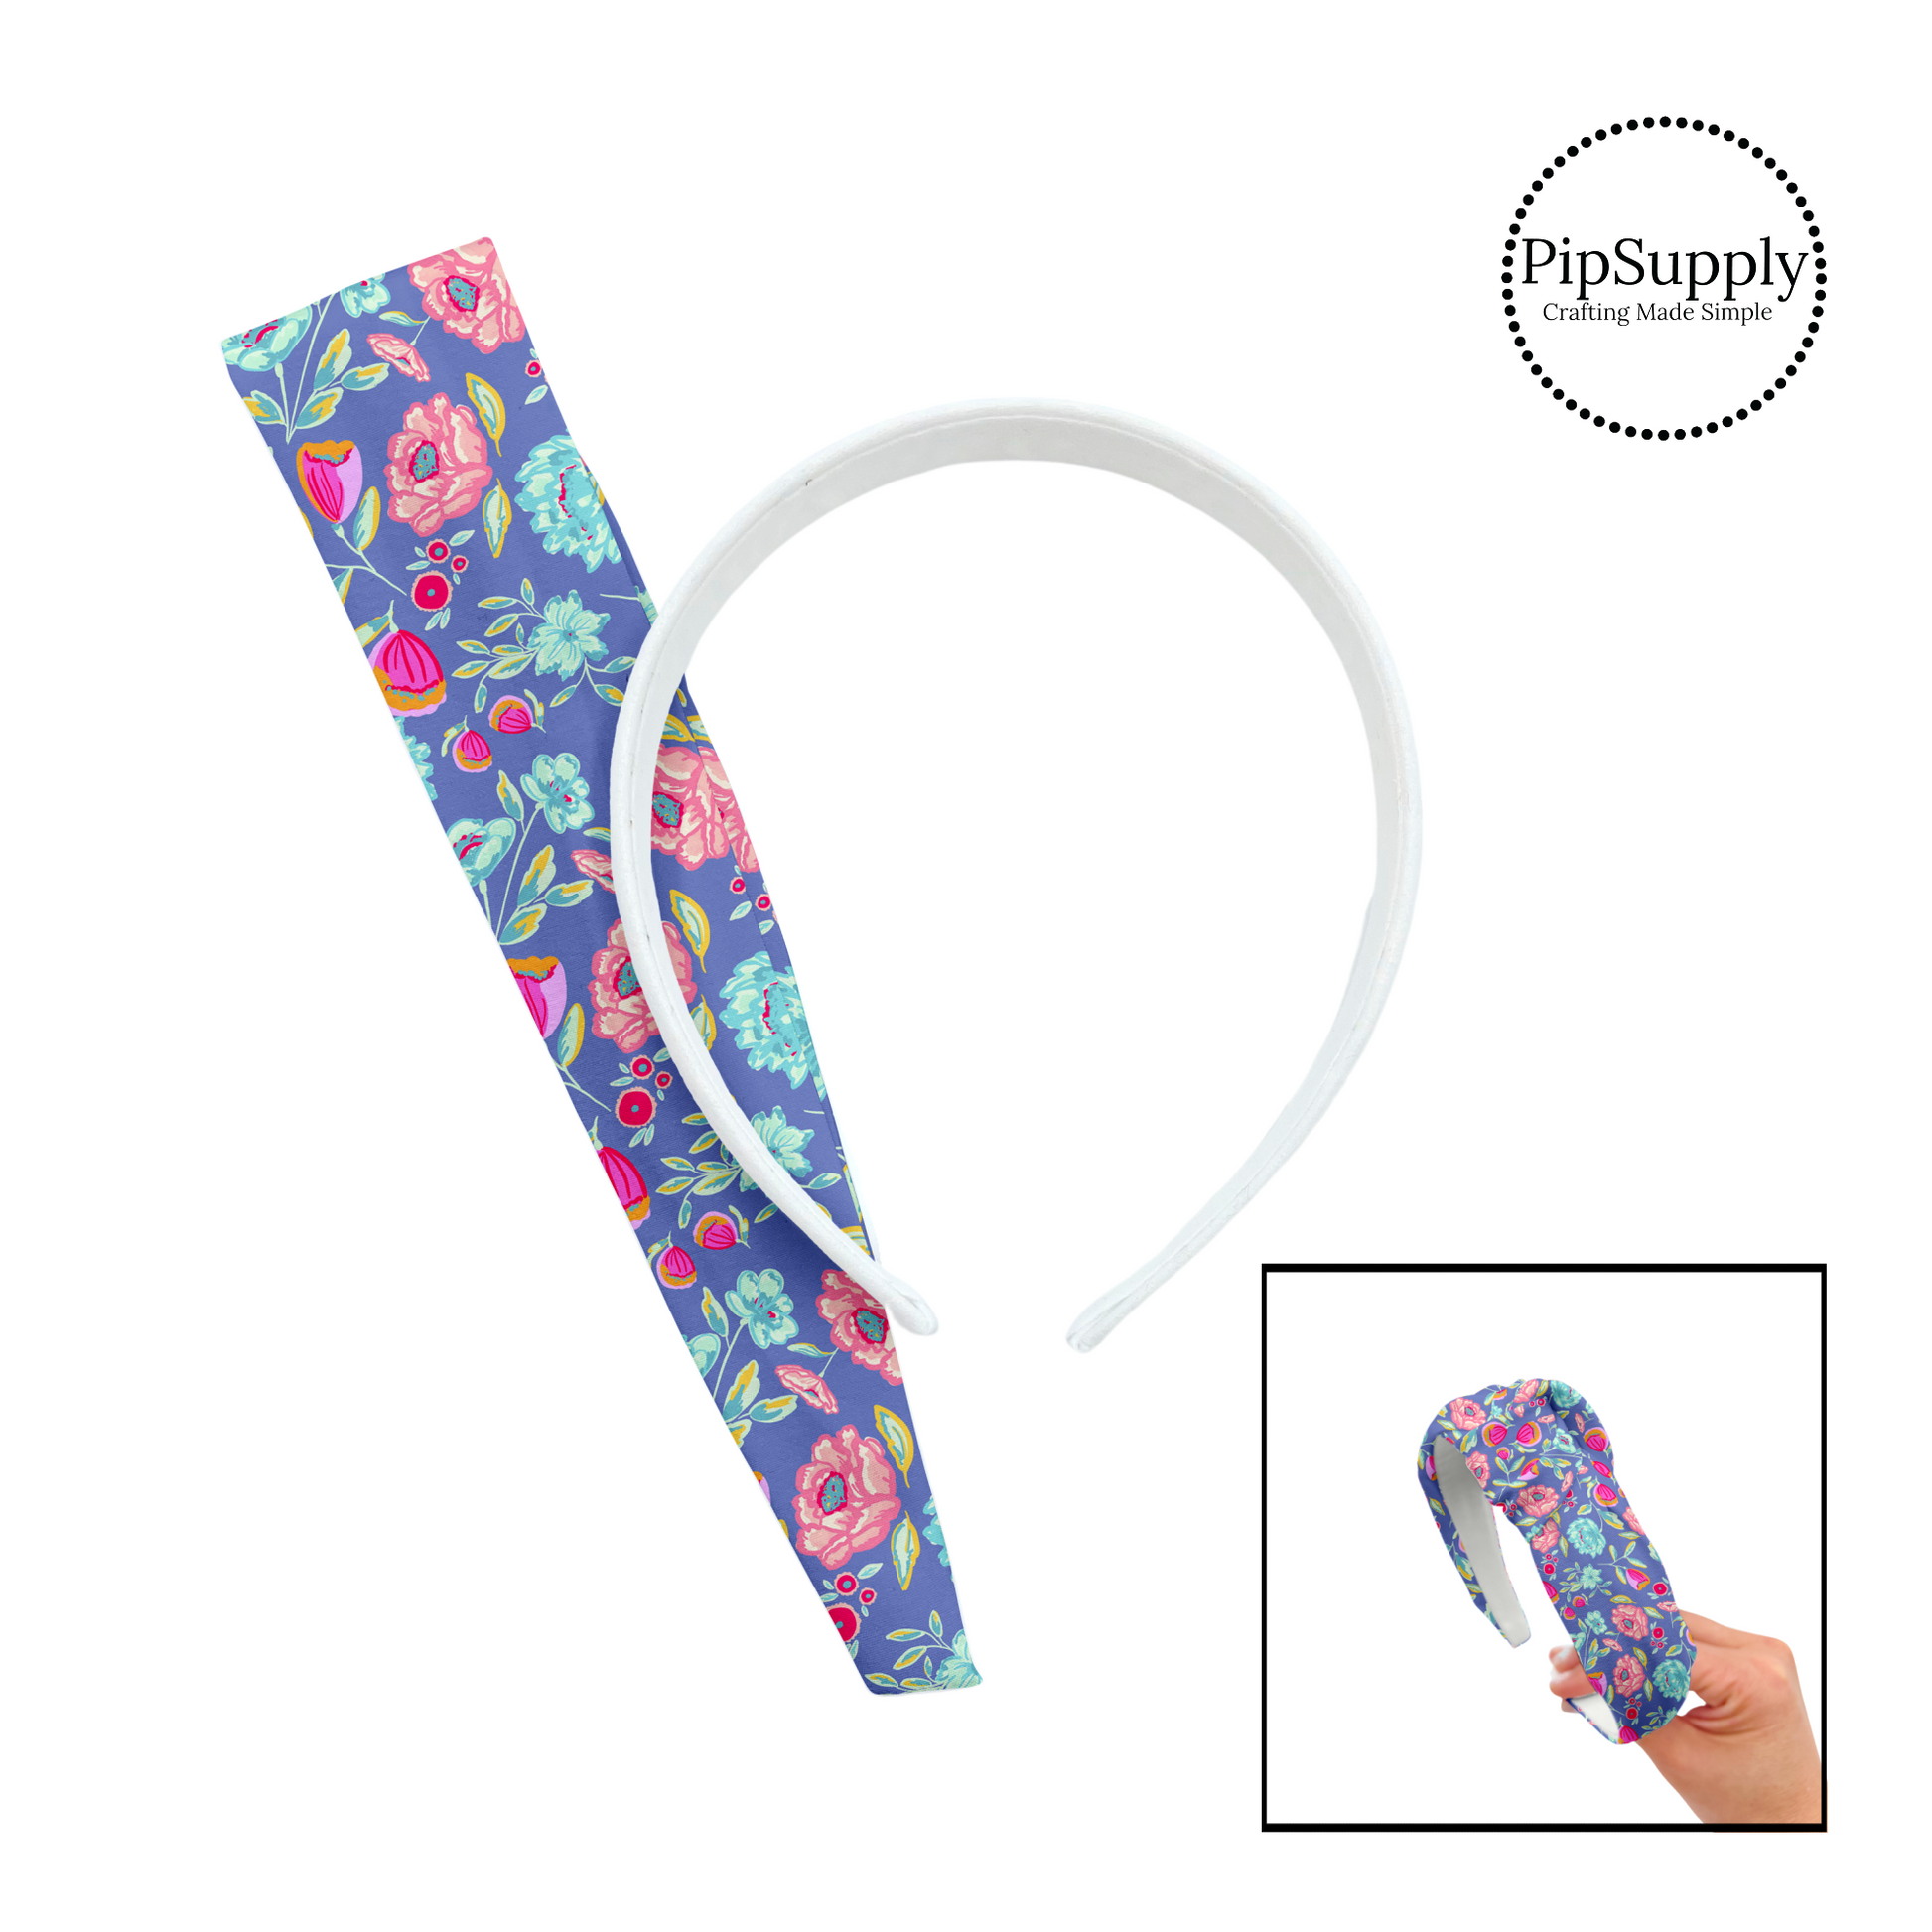 These fun spring and summer floral kits with beautiful leaves and flowers in the color of light blue, teal, mint, orange, light pink, hot pink, red, purple, and lavender include a custom printed and sewn fabric strip and a coordinating velvet headband.  